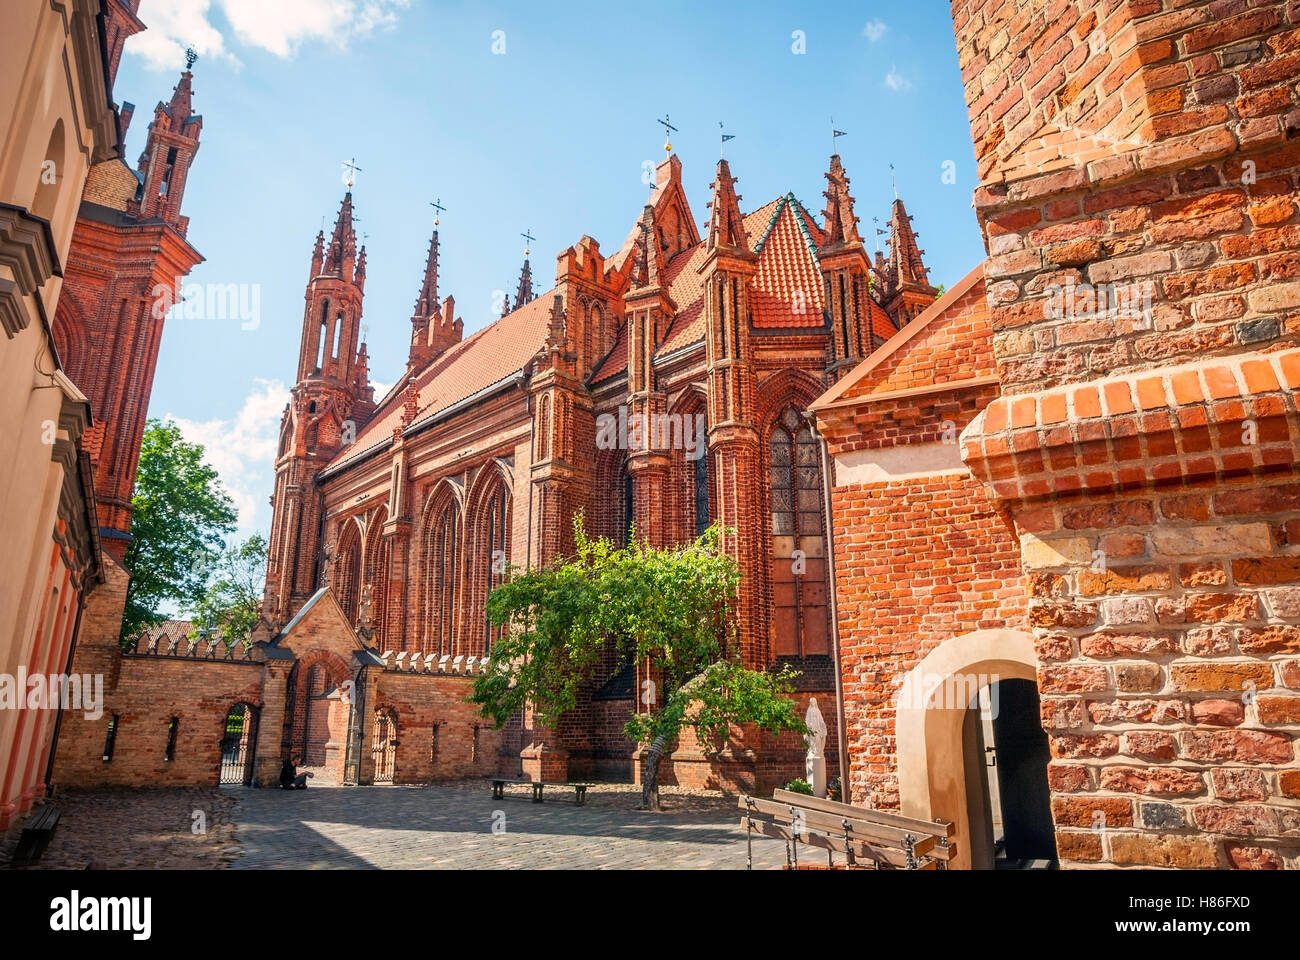 St. Anne's church in Vilnius old town, Lithuania Stock Photo